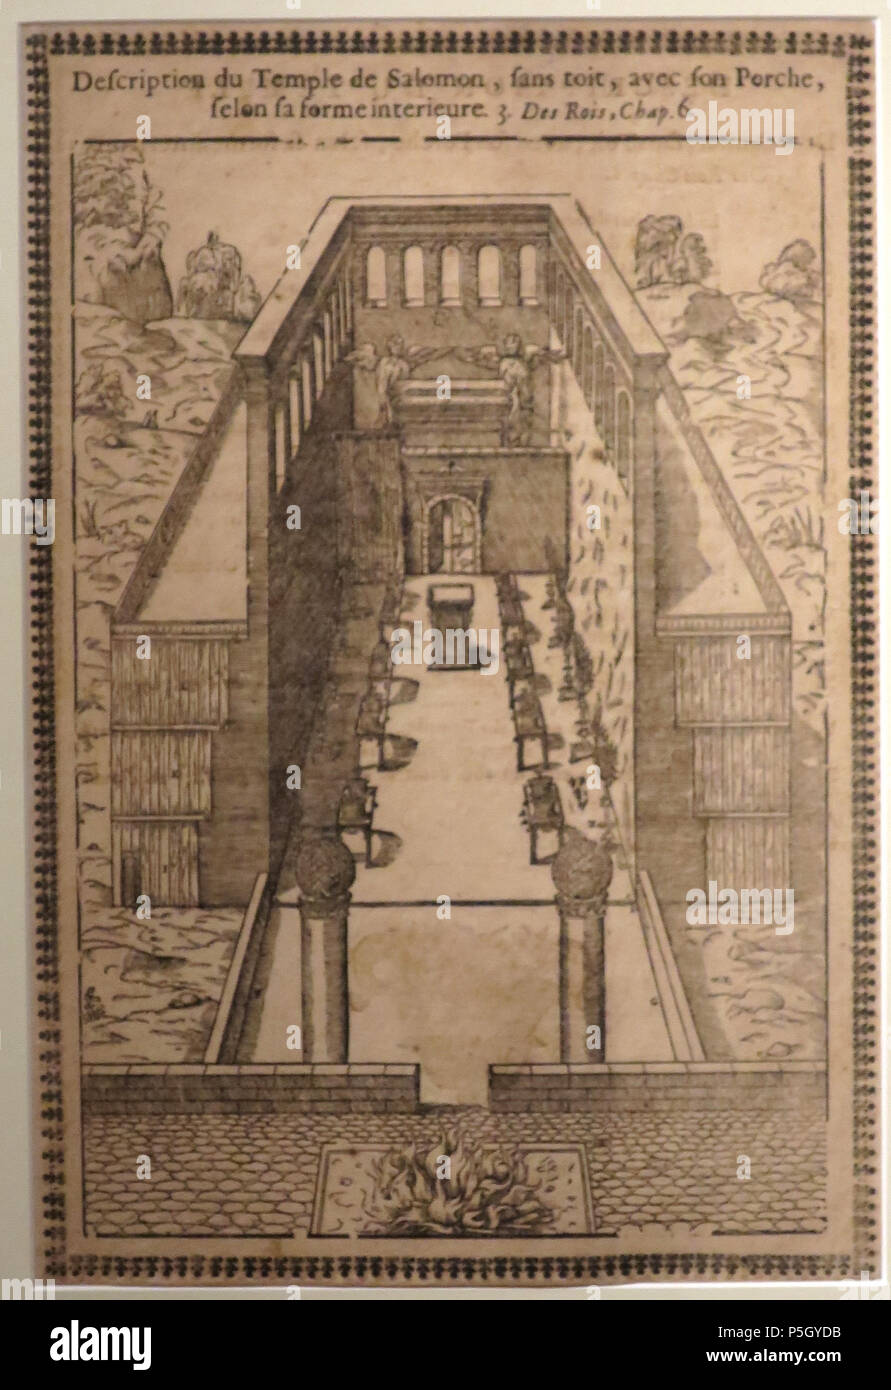 N/A. English: Description of the Temple of Solomon by an unknown artist, early 19th century, woodcut on paper, Dayton Art Institute . early 19th century. Unknown 2 'Description of the Temple of Solomon', early 19th century, woodcut, Dayton Art Institute Stock Photo